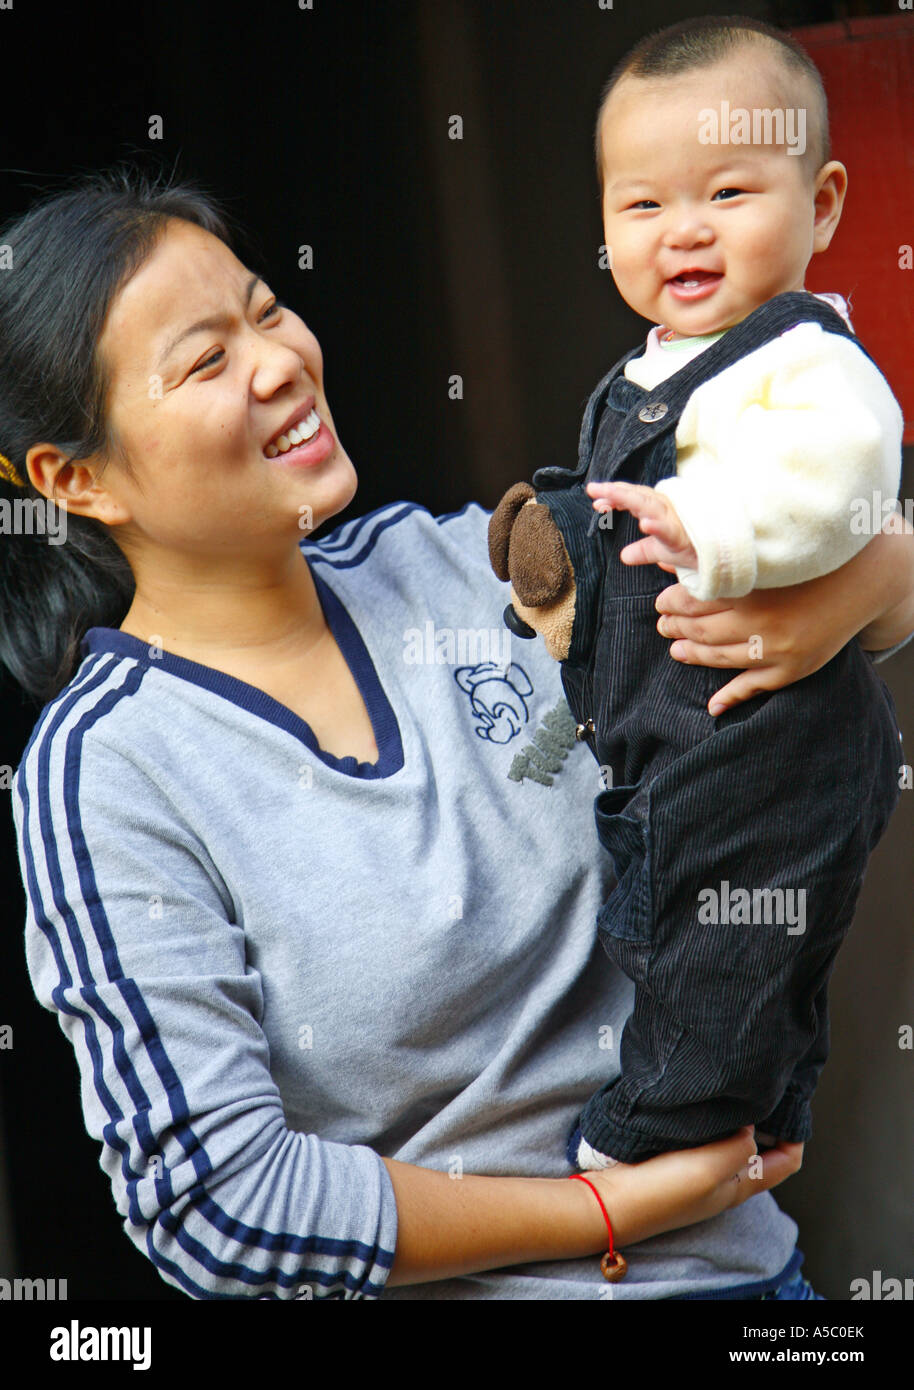 Smiling Mother and Child Vieille Ville Shanghai Jiangsu prov E Chine Banque D'Images